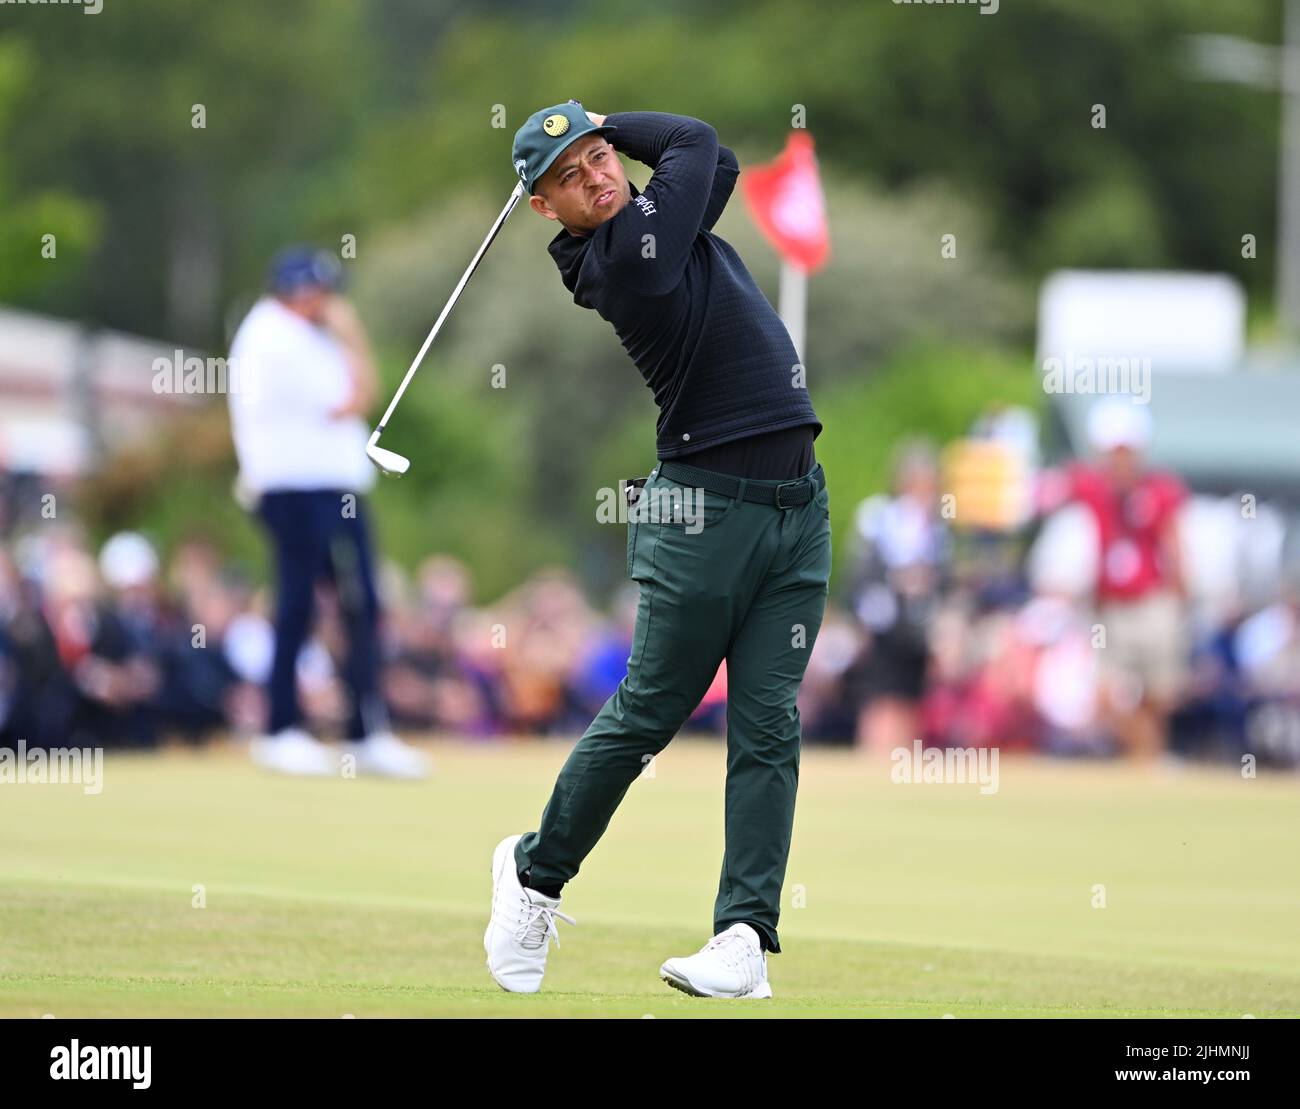 150th Open GolfChampionships, St Andrews, July 14th 2022 Xander Schauffele (USA) teeÕs off at the 18th during the first round at the Old Course, St An Stock Photo